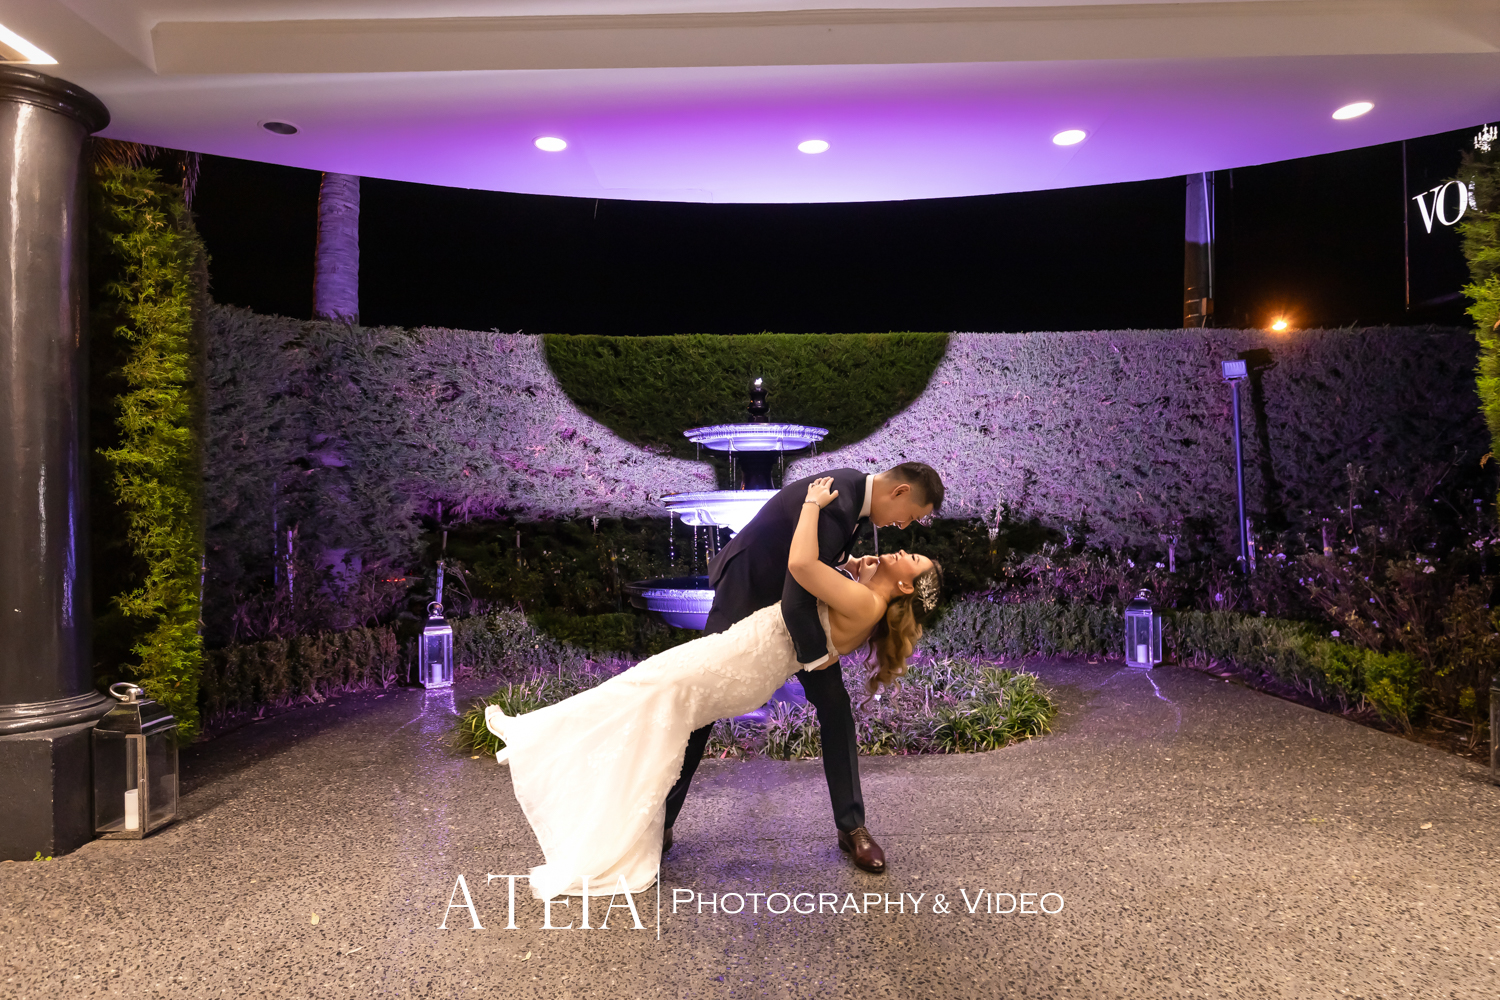 , Mei-Yan and Ethan&#8217;s wedding photography at Vogue Ballroom captured by ATEIA Photography &#038; Video